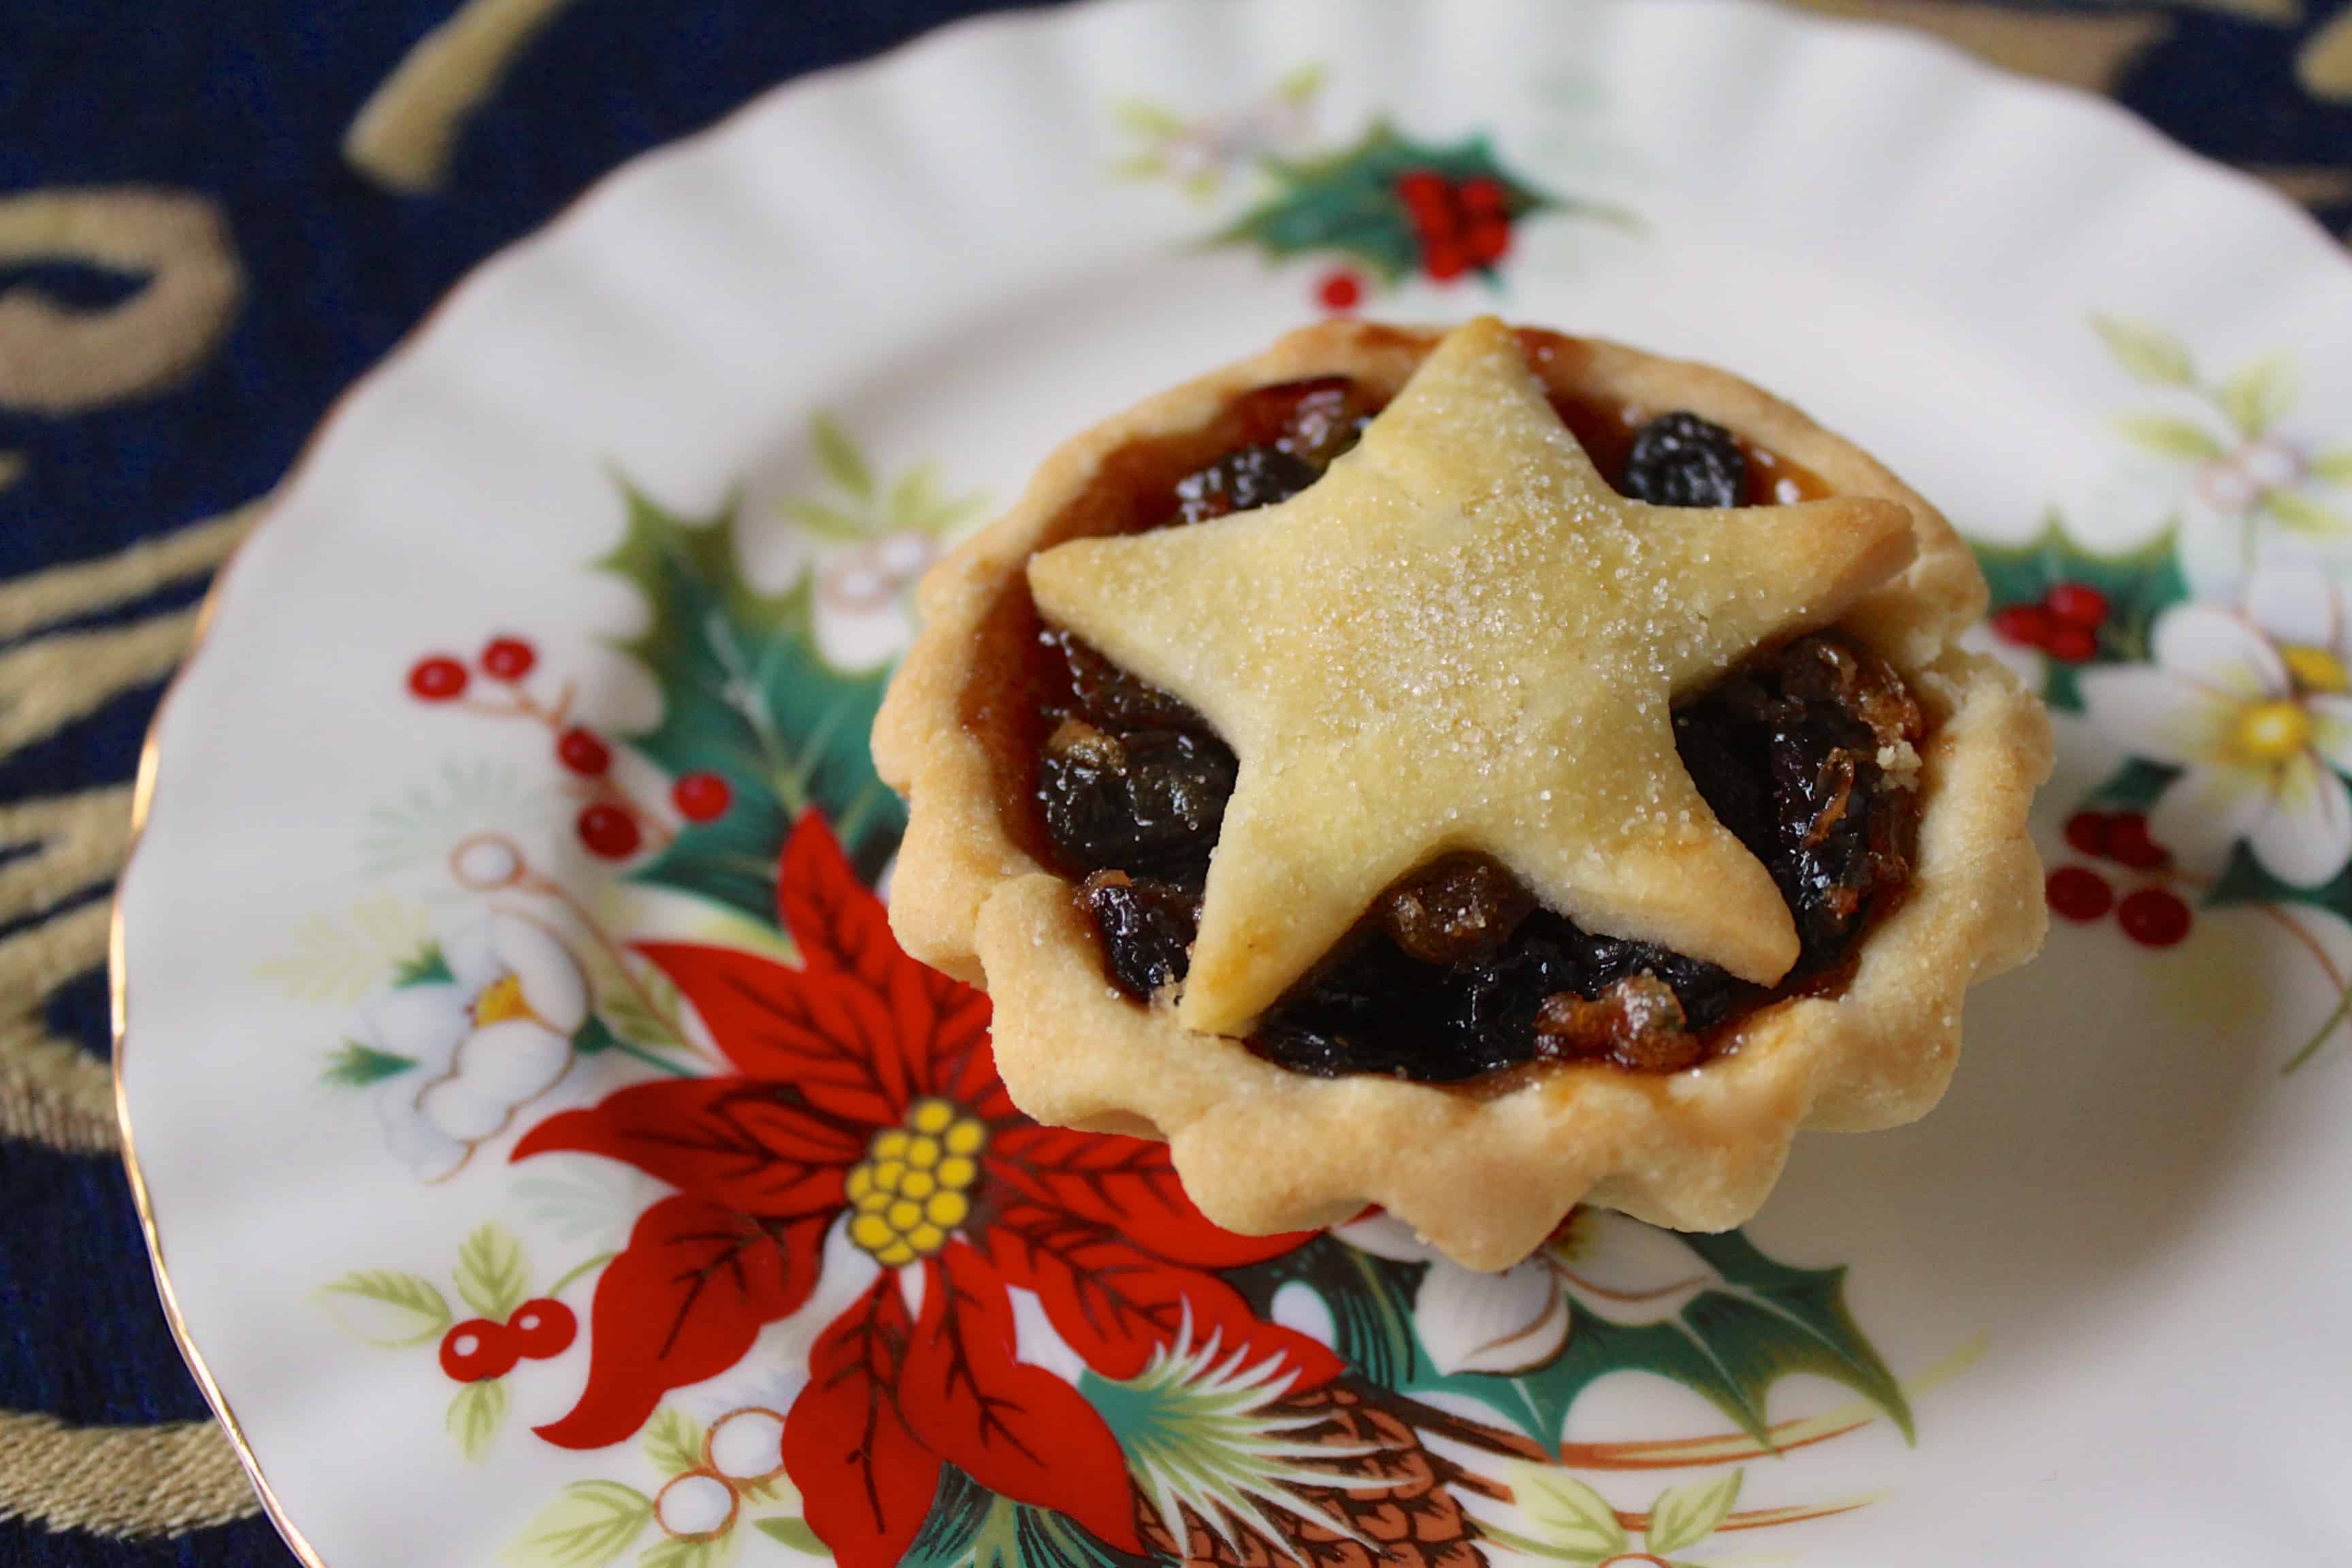 Mince Pies (Mincemeat) Pies for a Traditional British Christmas Treat